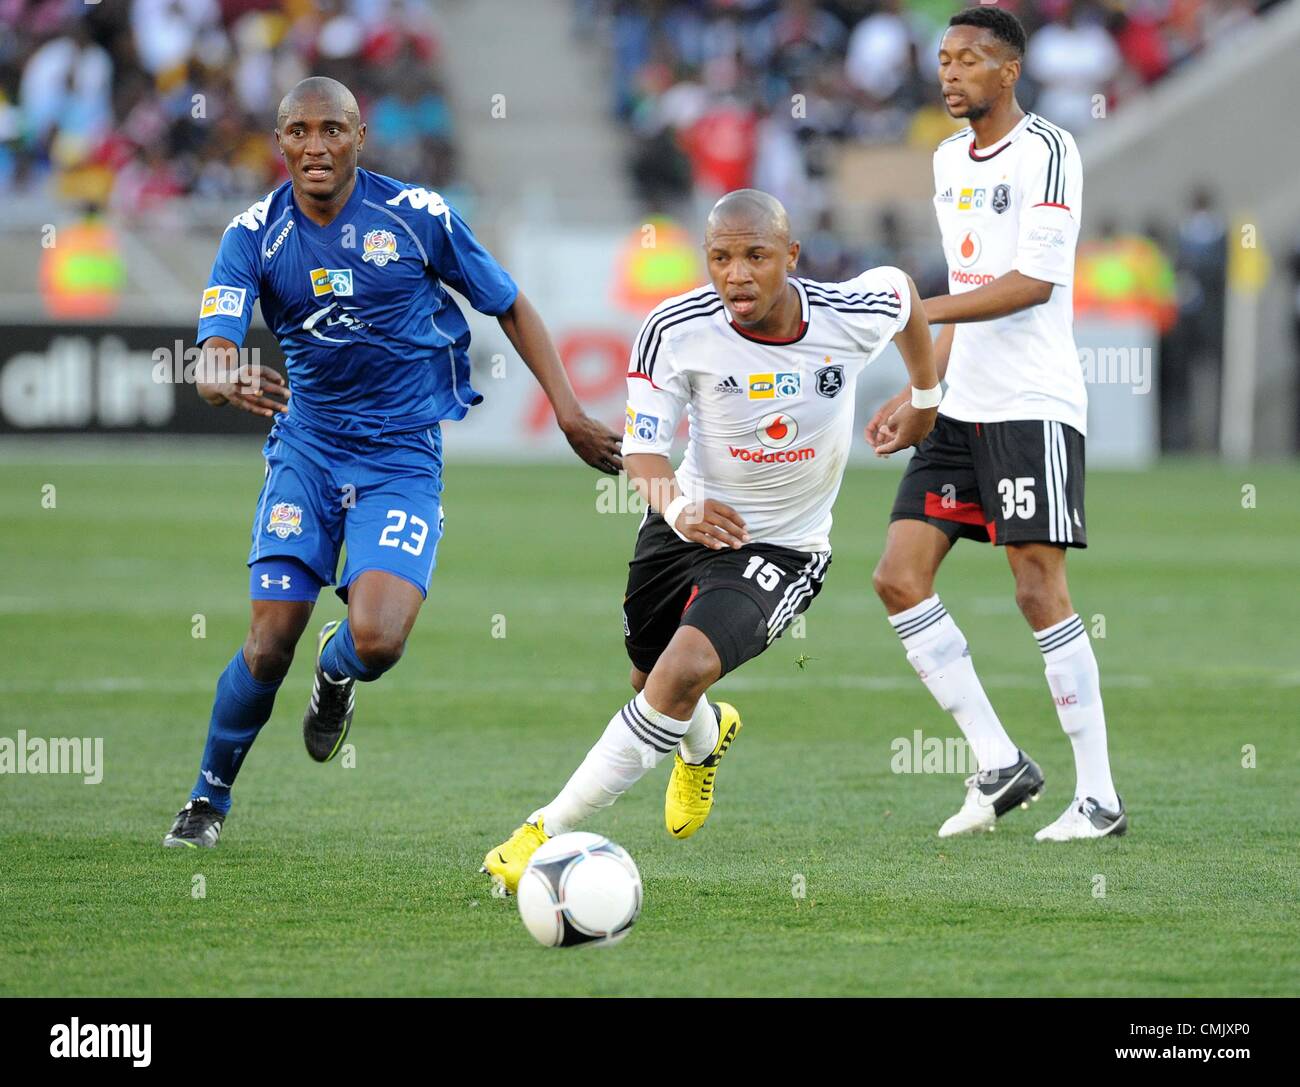 POLOKWANE, SOUTH AFRICA - AUGUST 19, Andile Jali during the MTN 8 1st leg semi final match between SuperSport United and Orlando Pirates at Peter Mokaba Stadium on August 19, 2012 in Polokwane, South Africa Photo by Lee Warren / Gallo Images Stock Photo